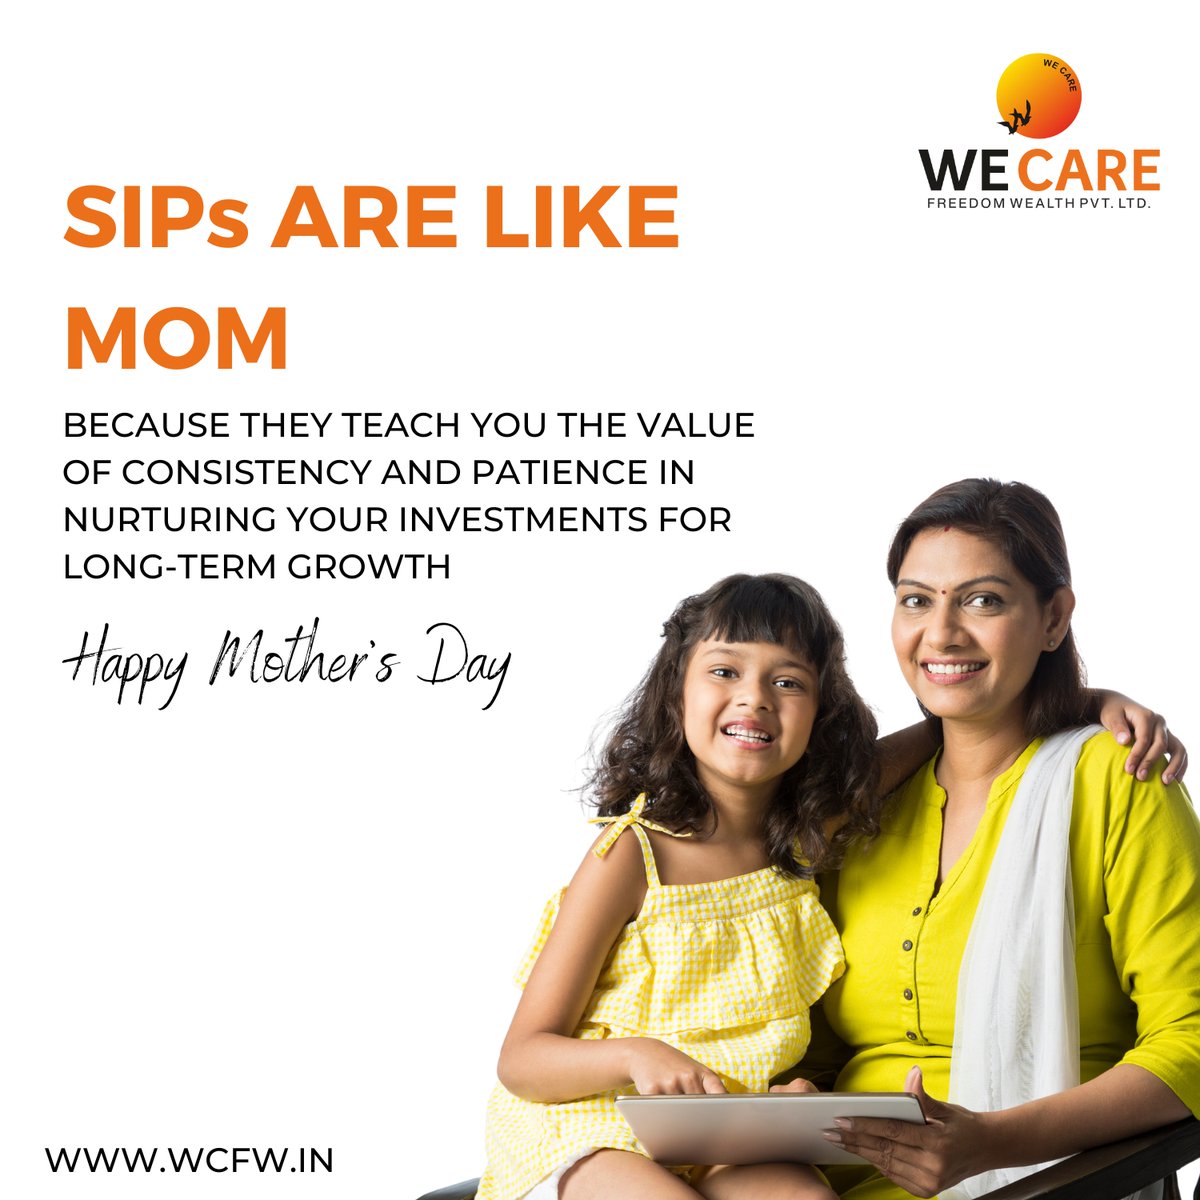 SIPs ARE LIKE MOM

Because they teach you the value of consistency and patience in Nurturing your investments for Long-Term Growth.

 #happymothersday2023 #WealthManagement #FinancialPlanning #wcfw #wecarefreedomwealth #teamwcfw #FinancialFreedom